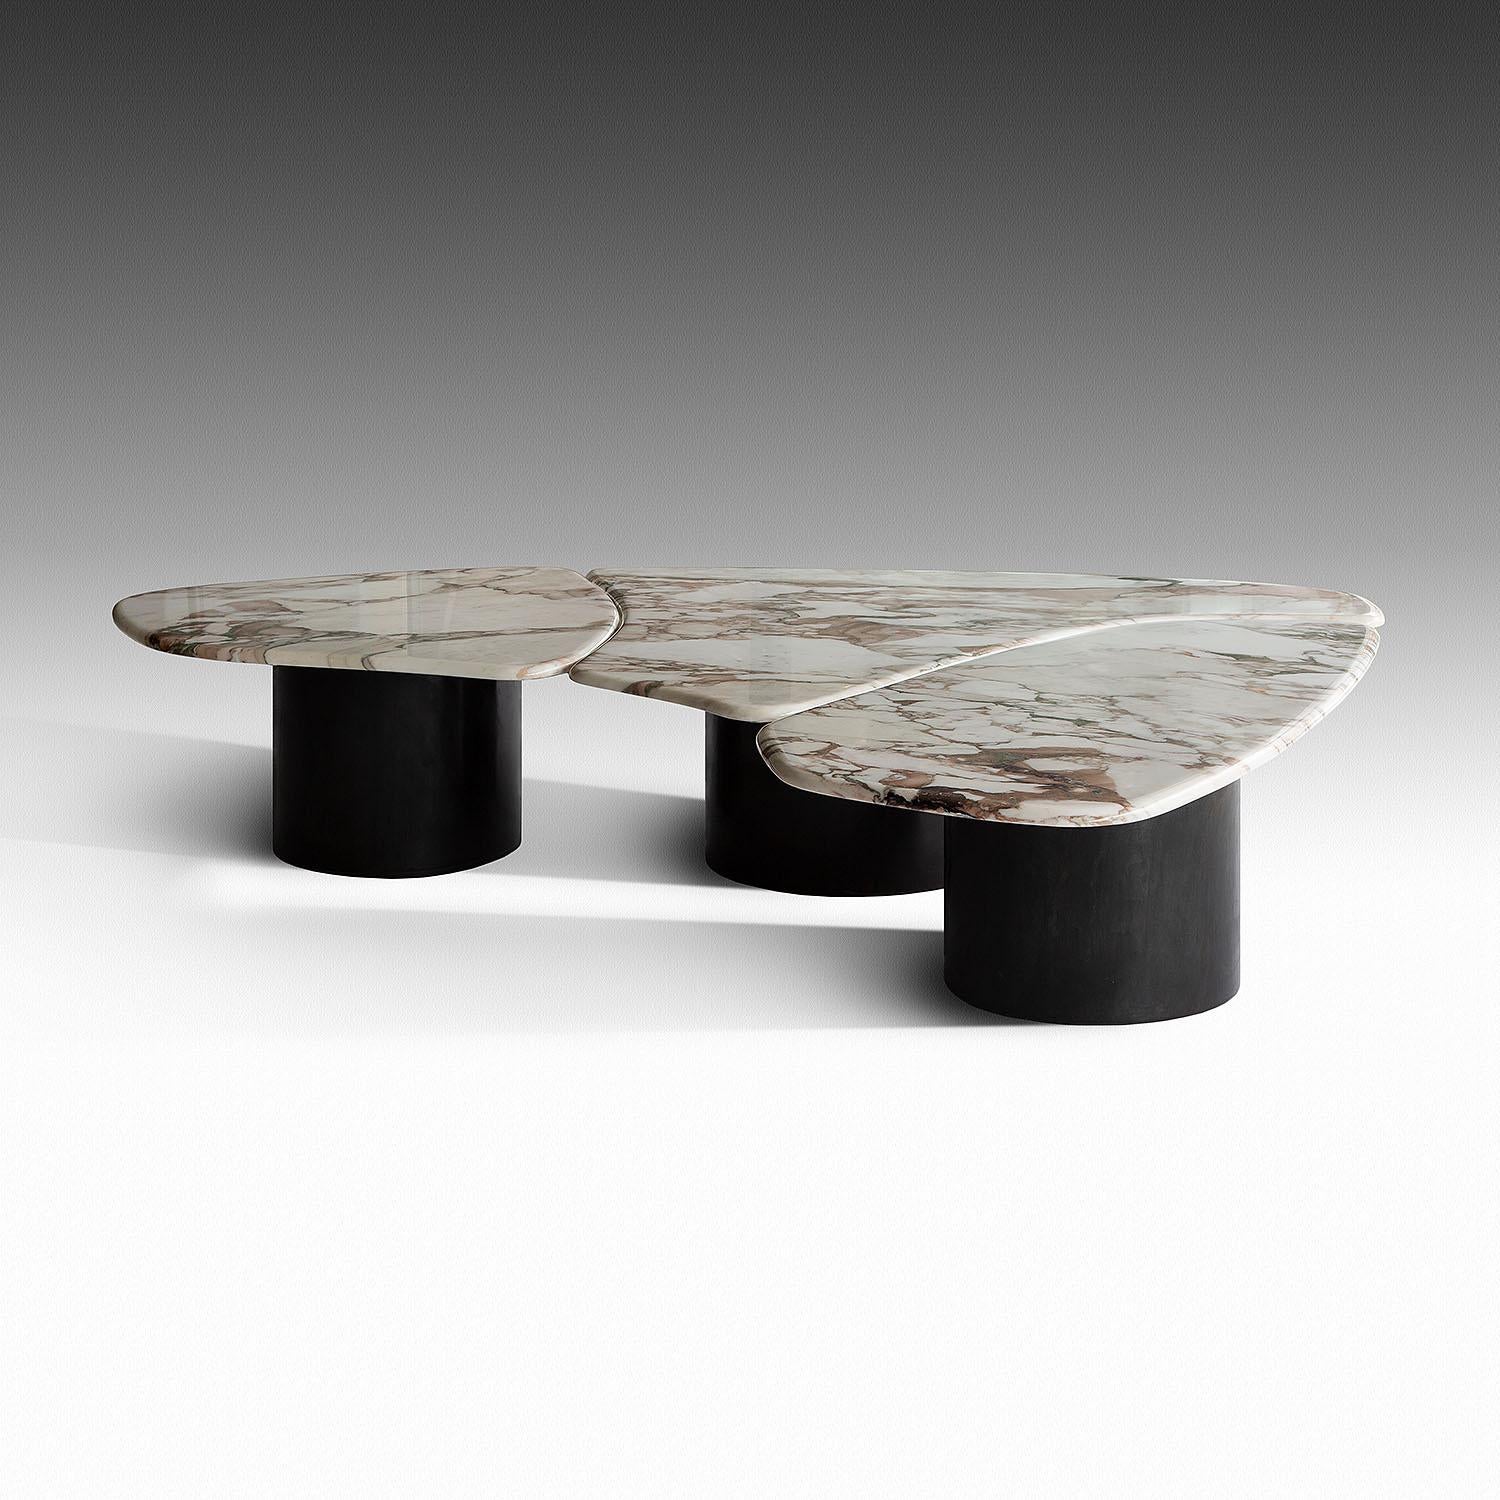 Contemporary marble coffee table - Tectra by Adam Court for OKHA

Design: Adam Court

Base: patinated blue black mild steel / powdercoated mild steel
Marble Top: Nero Marquina / Verde Guatemala / Carrara / Rosso Levante / Calacatta